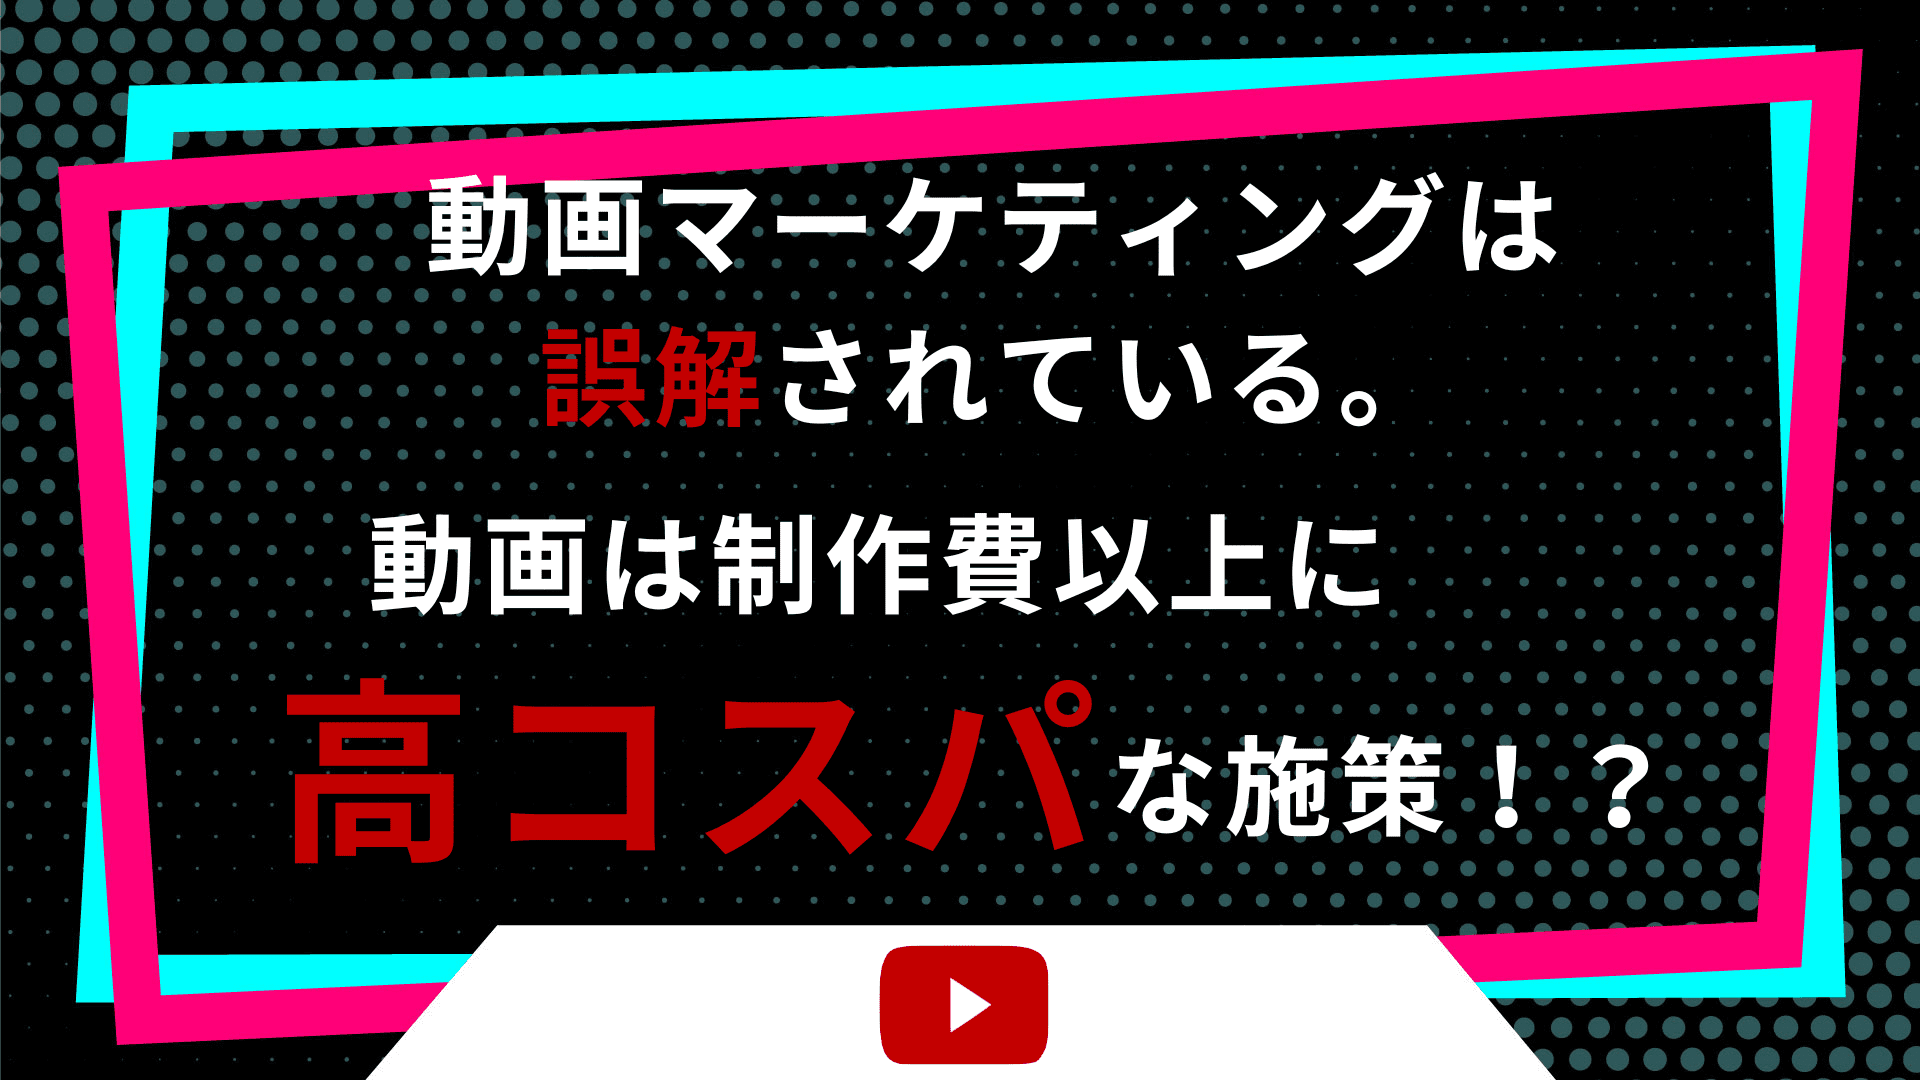 YouTubeを収益化させるには？コツを紹介します！